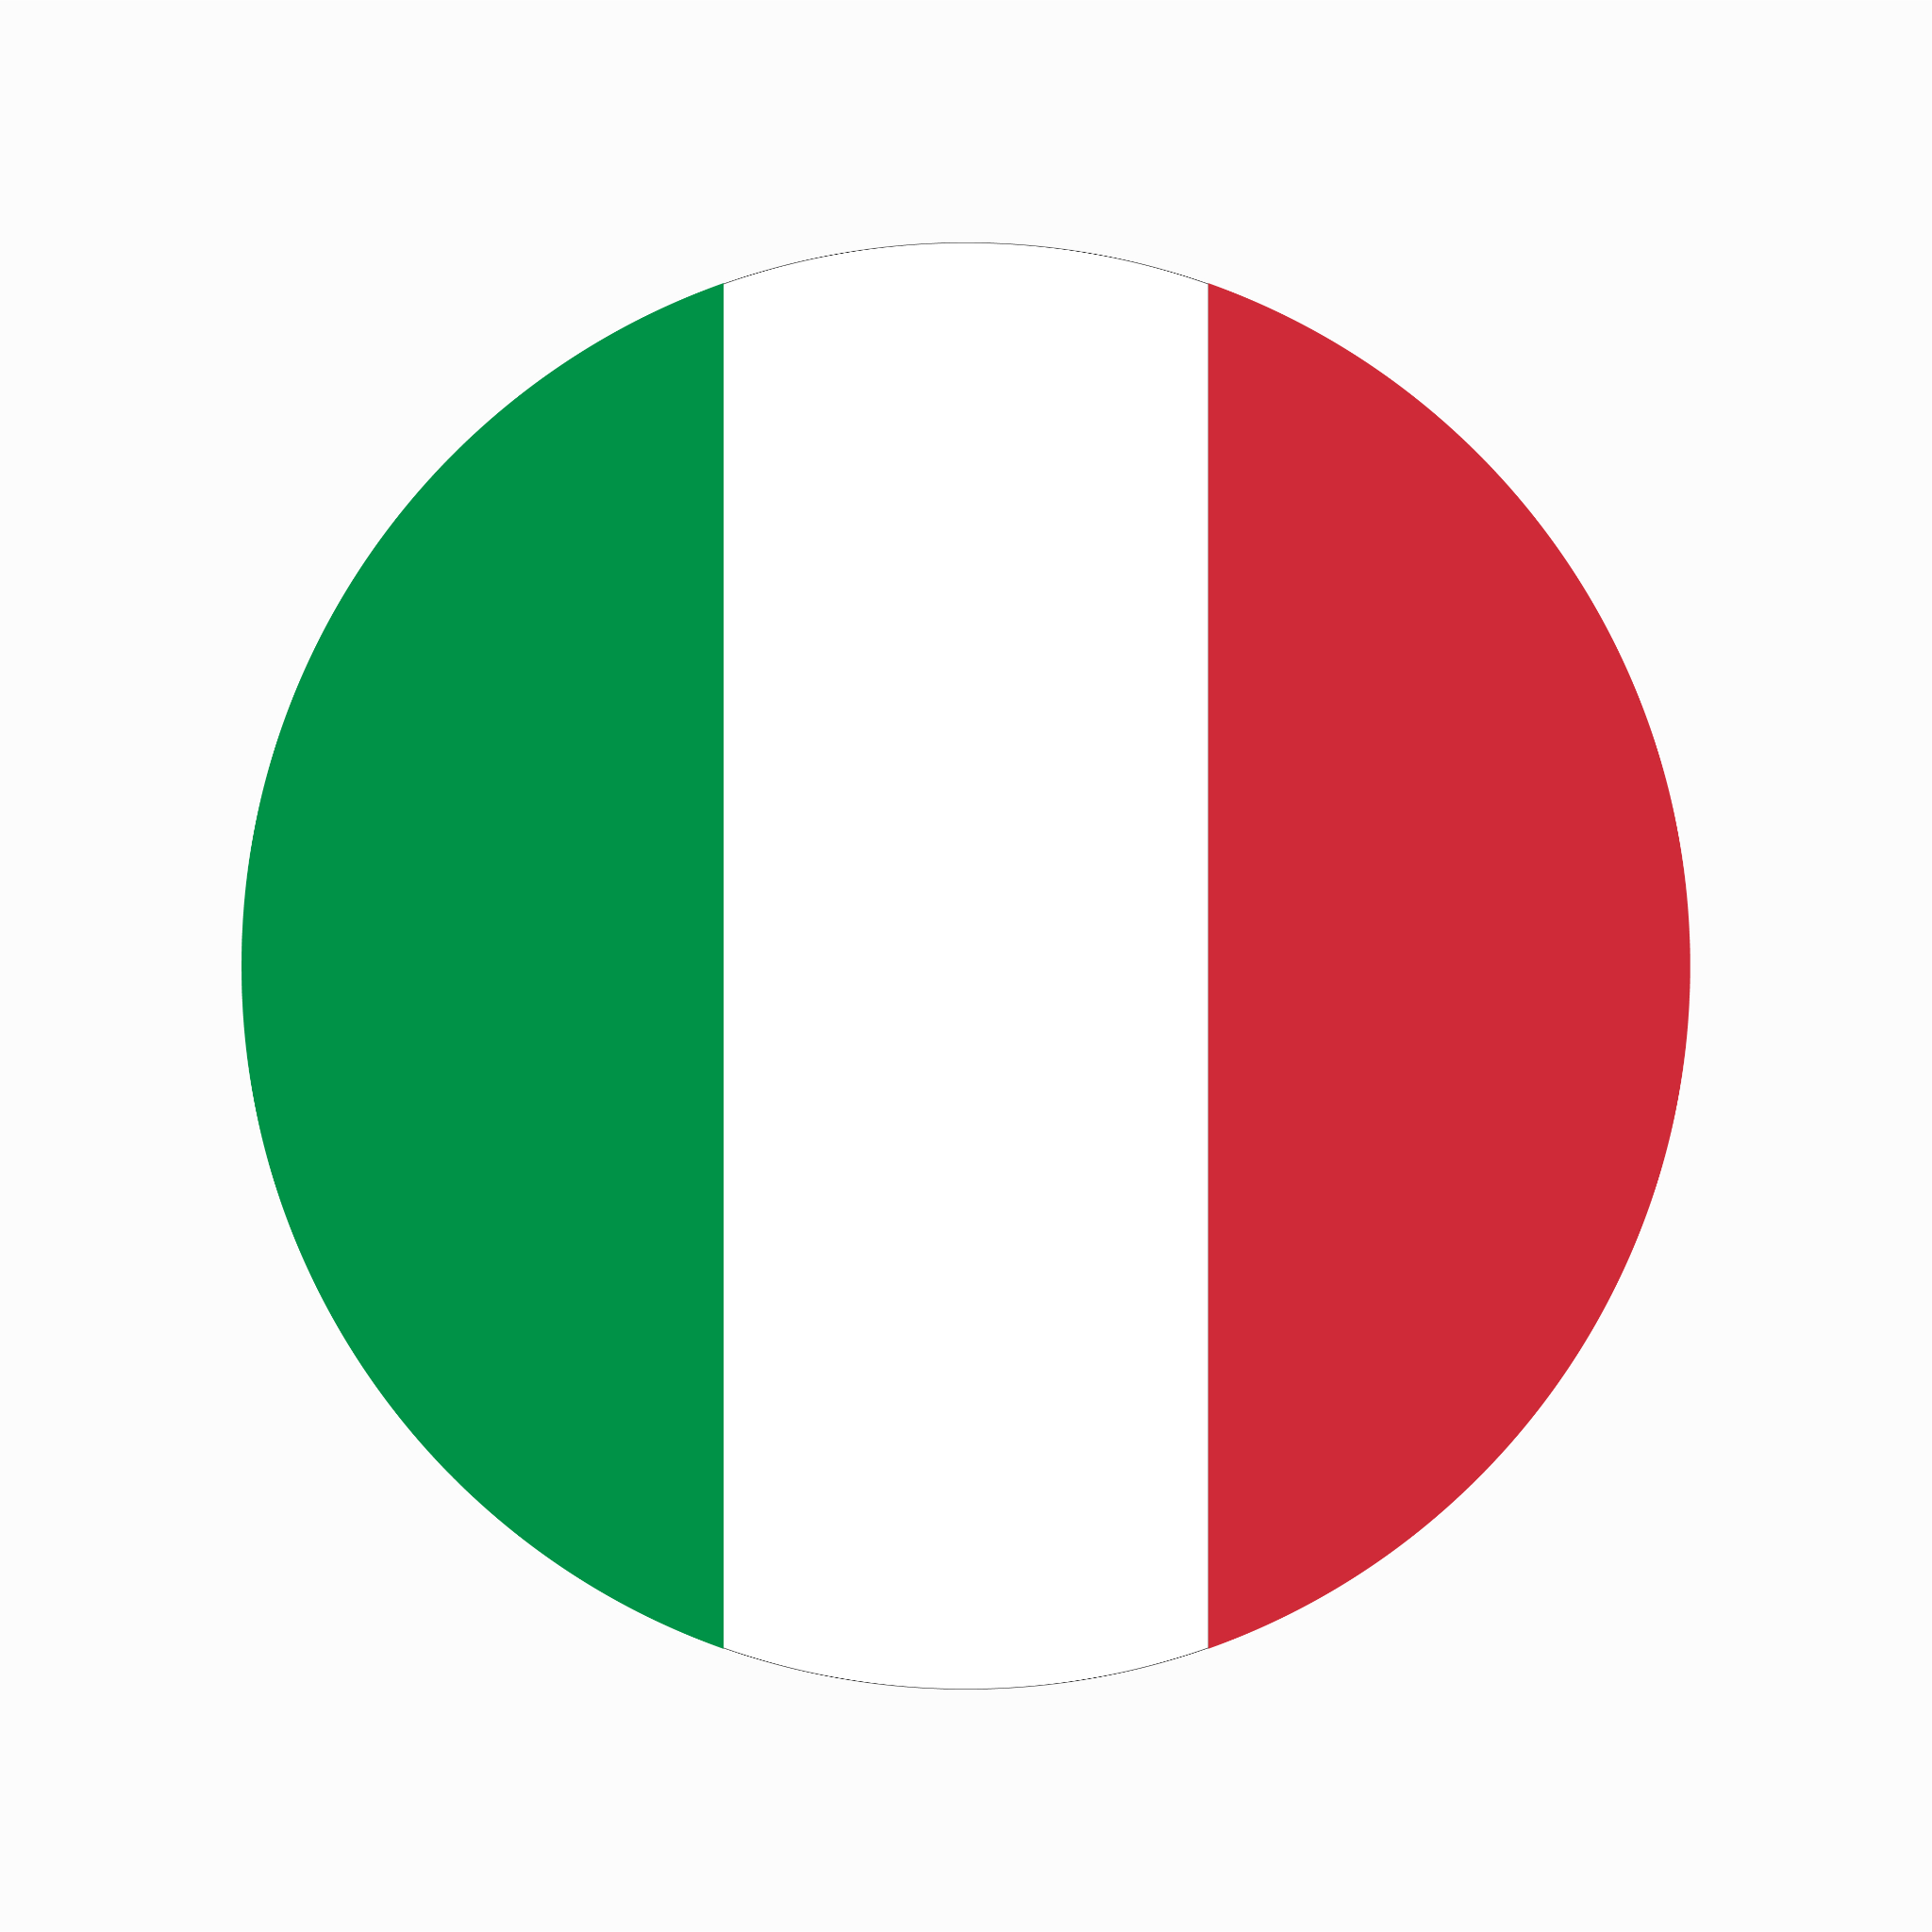 Image of the Italian flag, a tricolor emblem representing the rich cultural heritage and history, symbolizing language, translation, and interpretation in the heart of Italy.